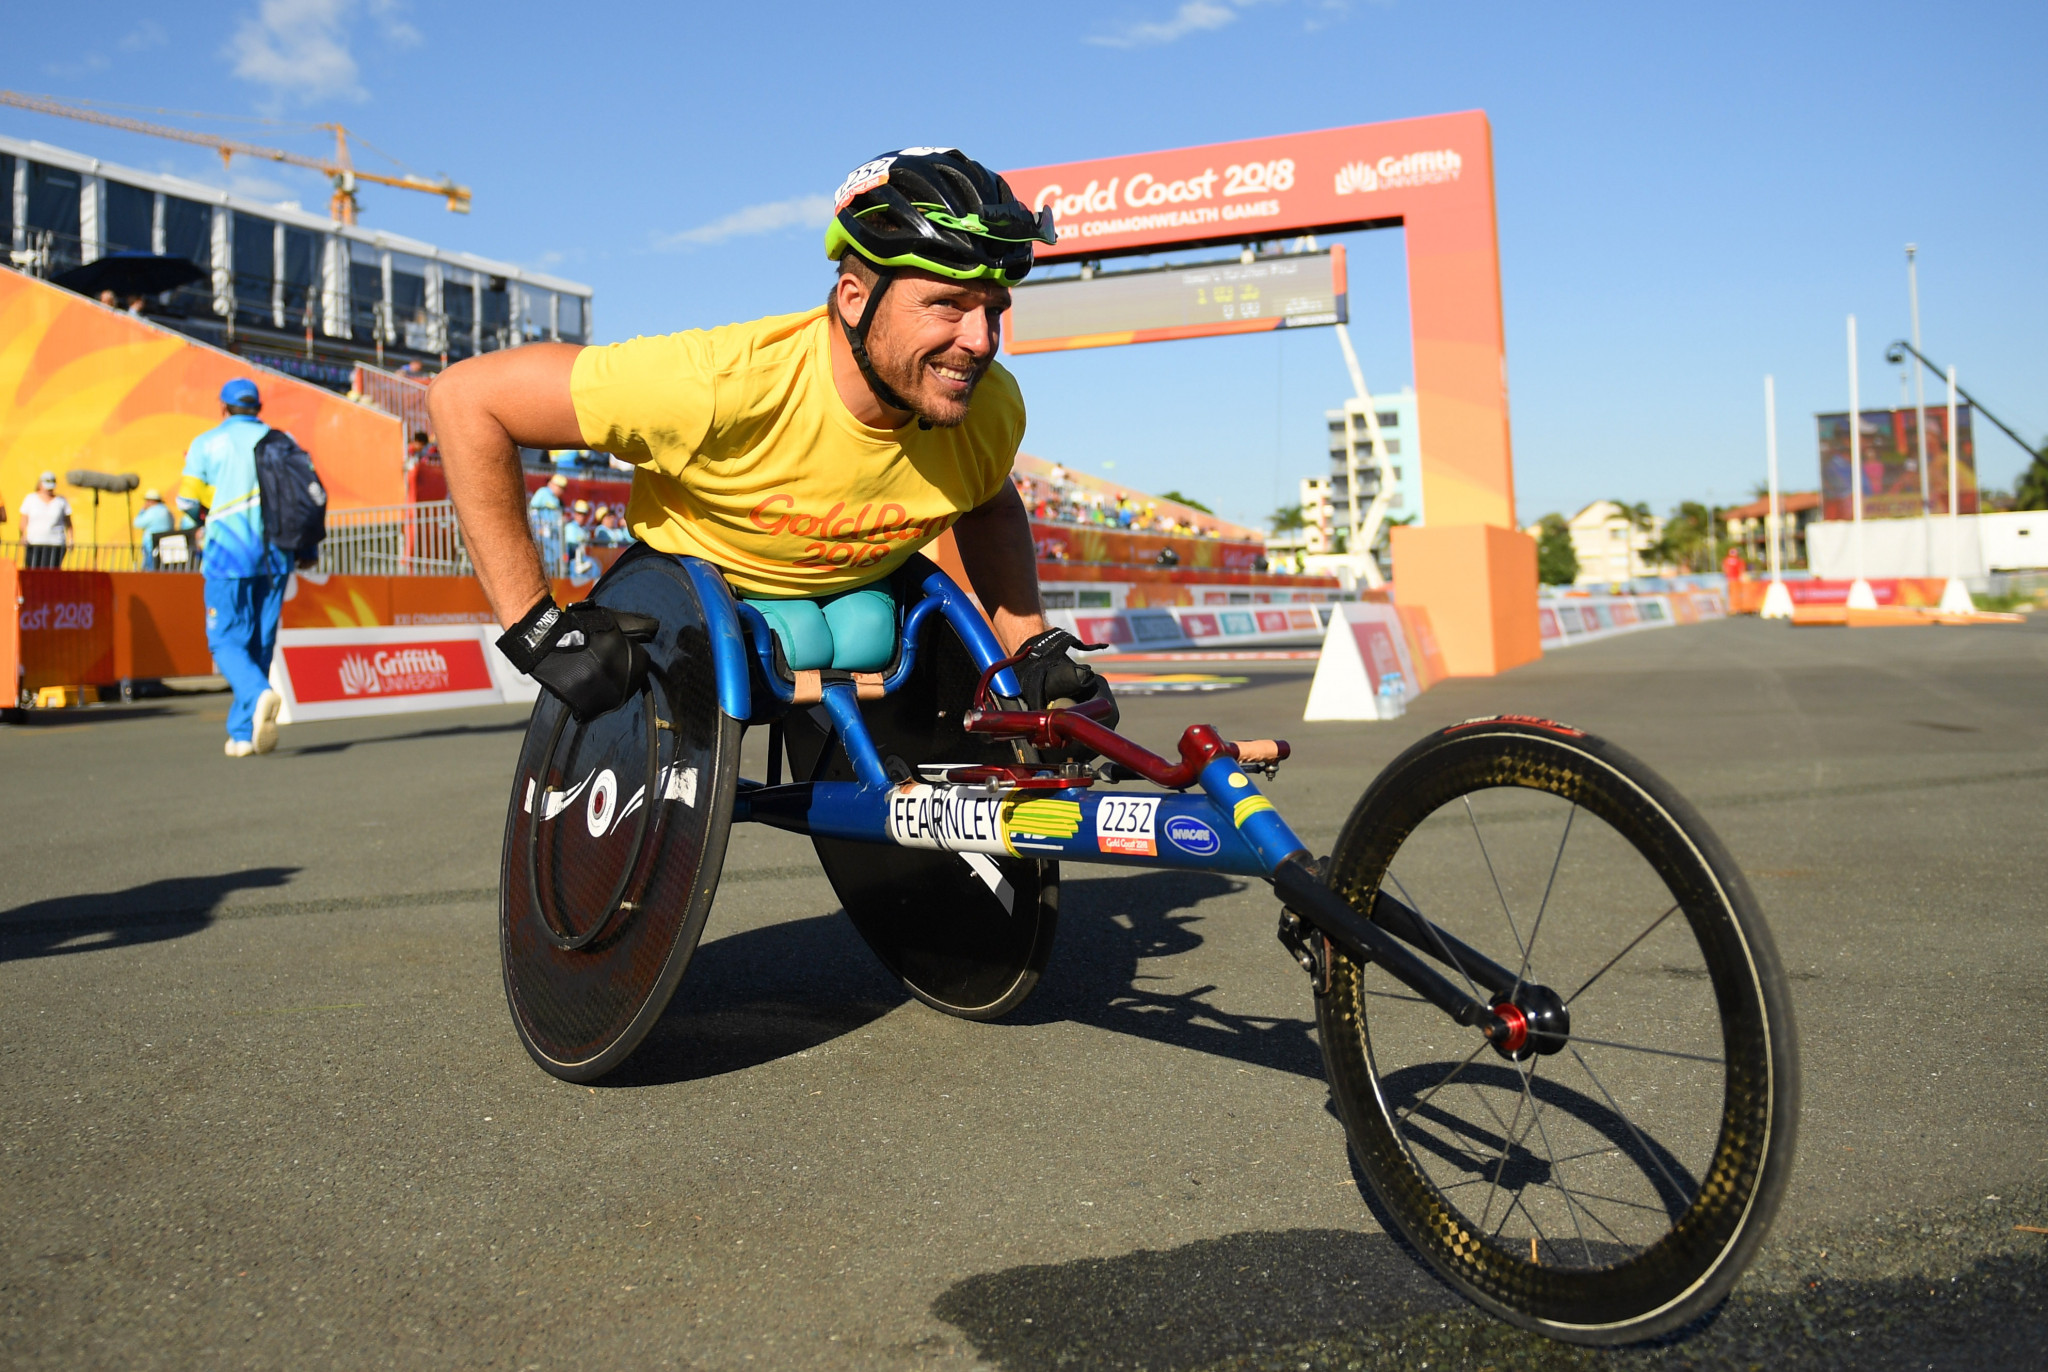 Five athletes have been named as recipients of the Kurt Fearnley scholarship ©Getty Images